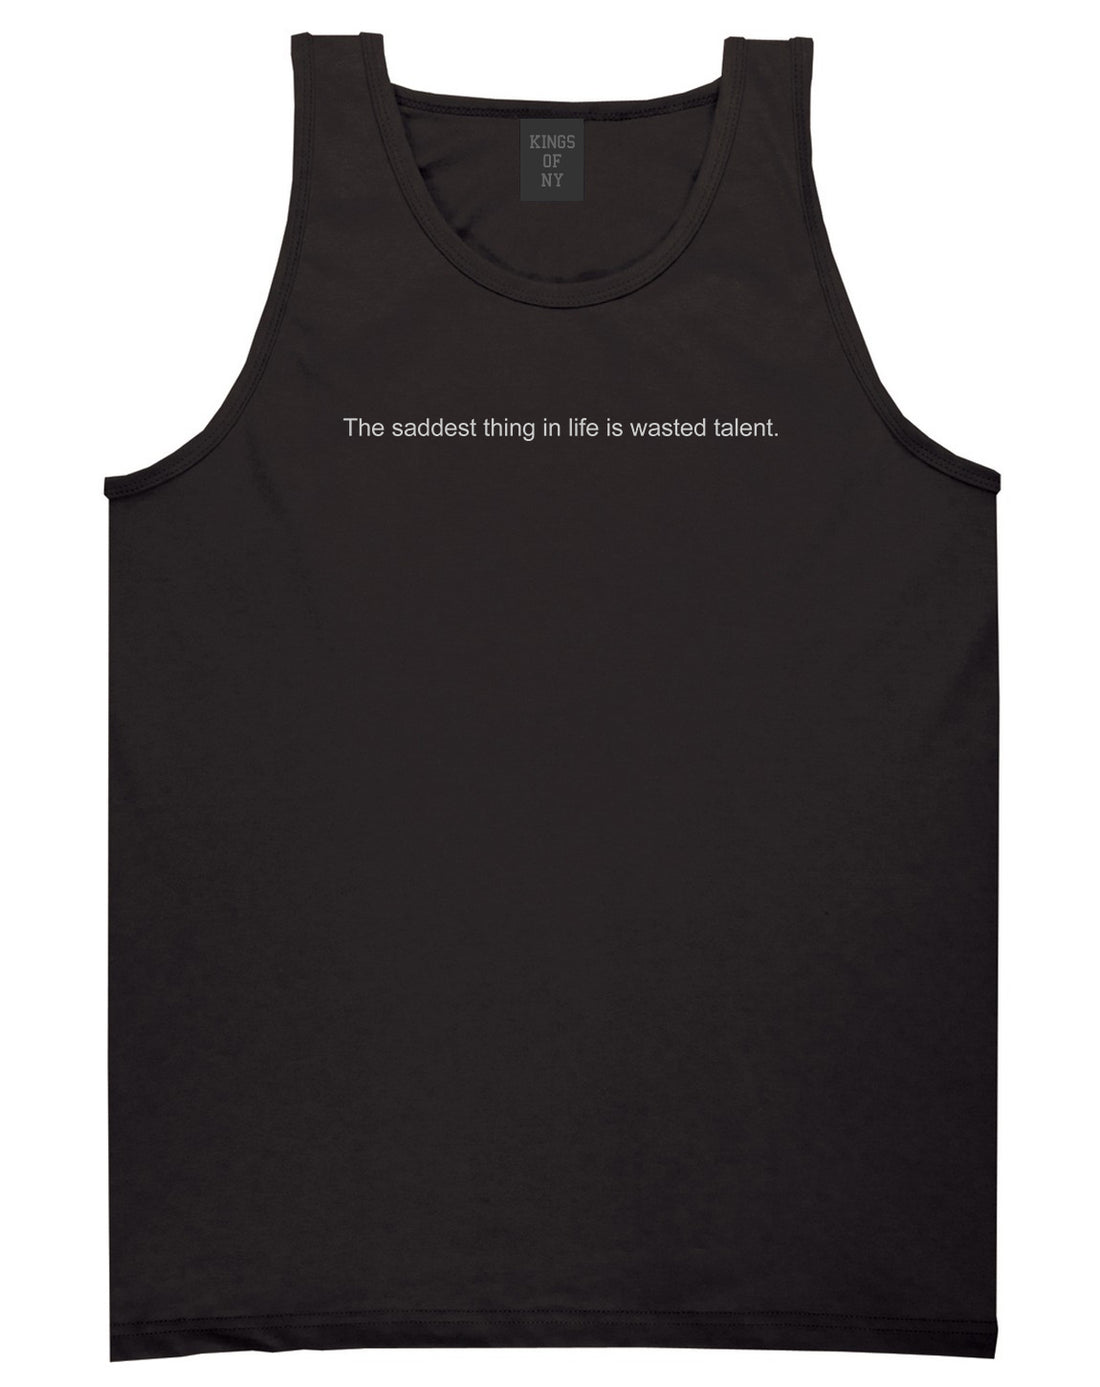 The Saddest Thing In Life Is Wasted Talent Mens Tank Top Shirt Black